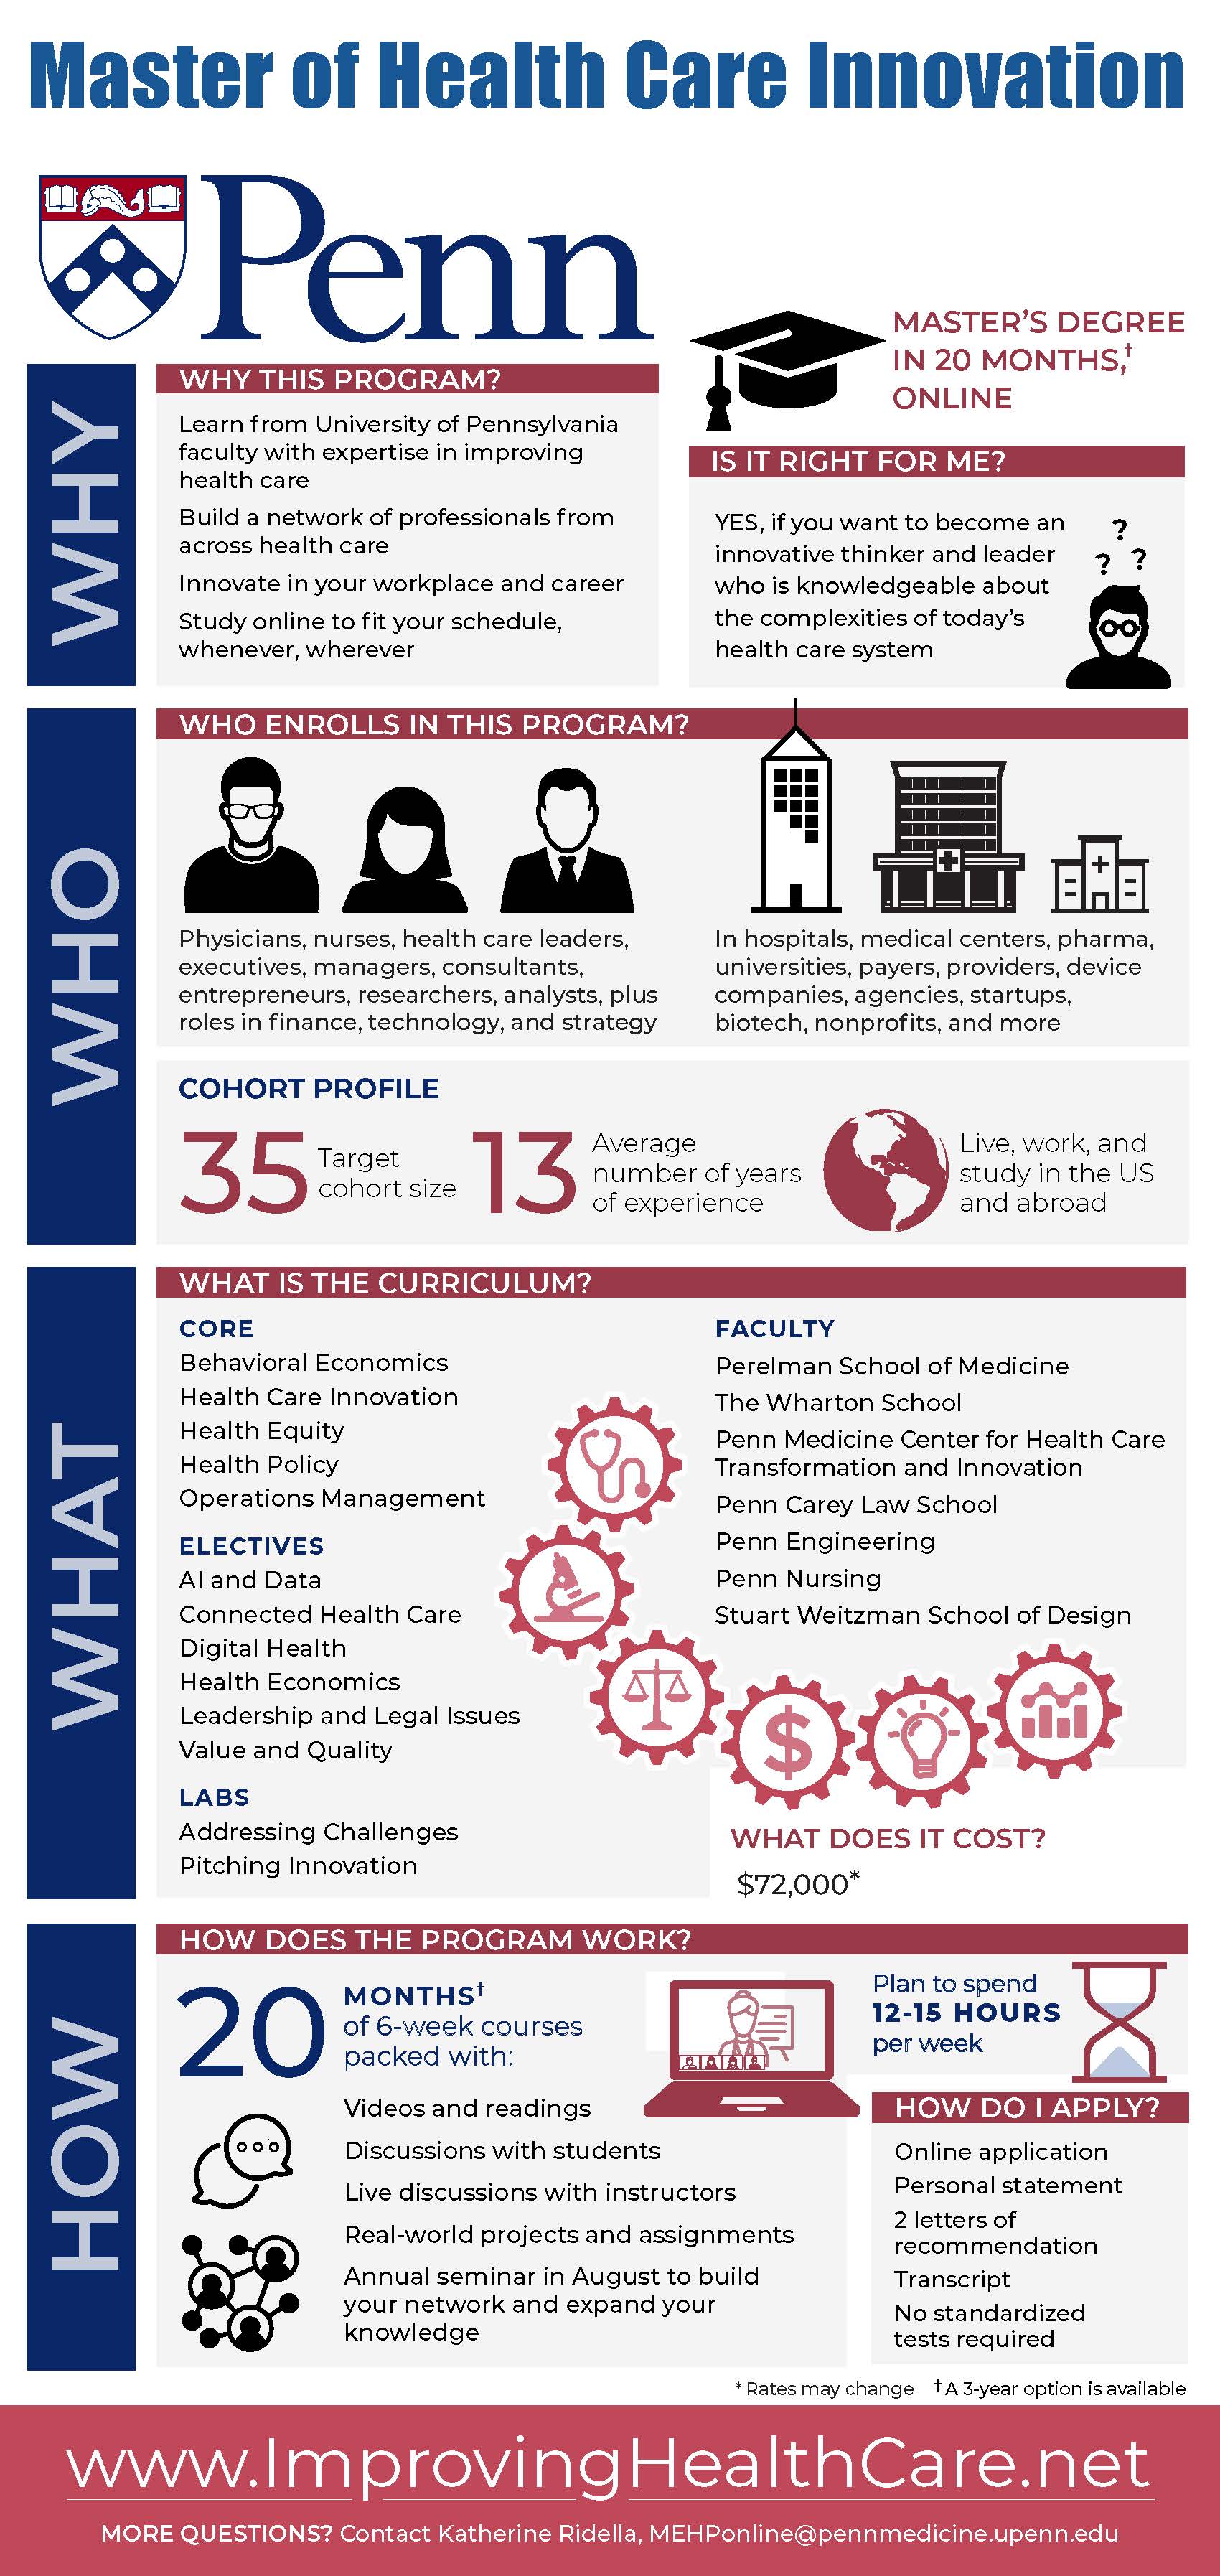 MHCI infographic with why who what and how